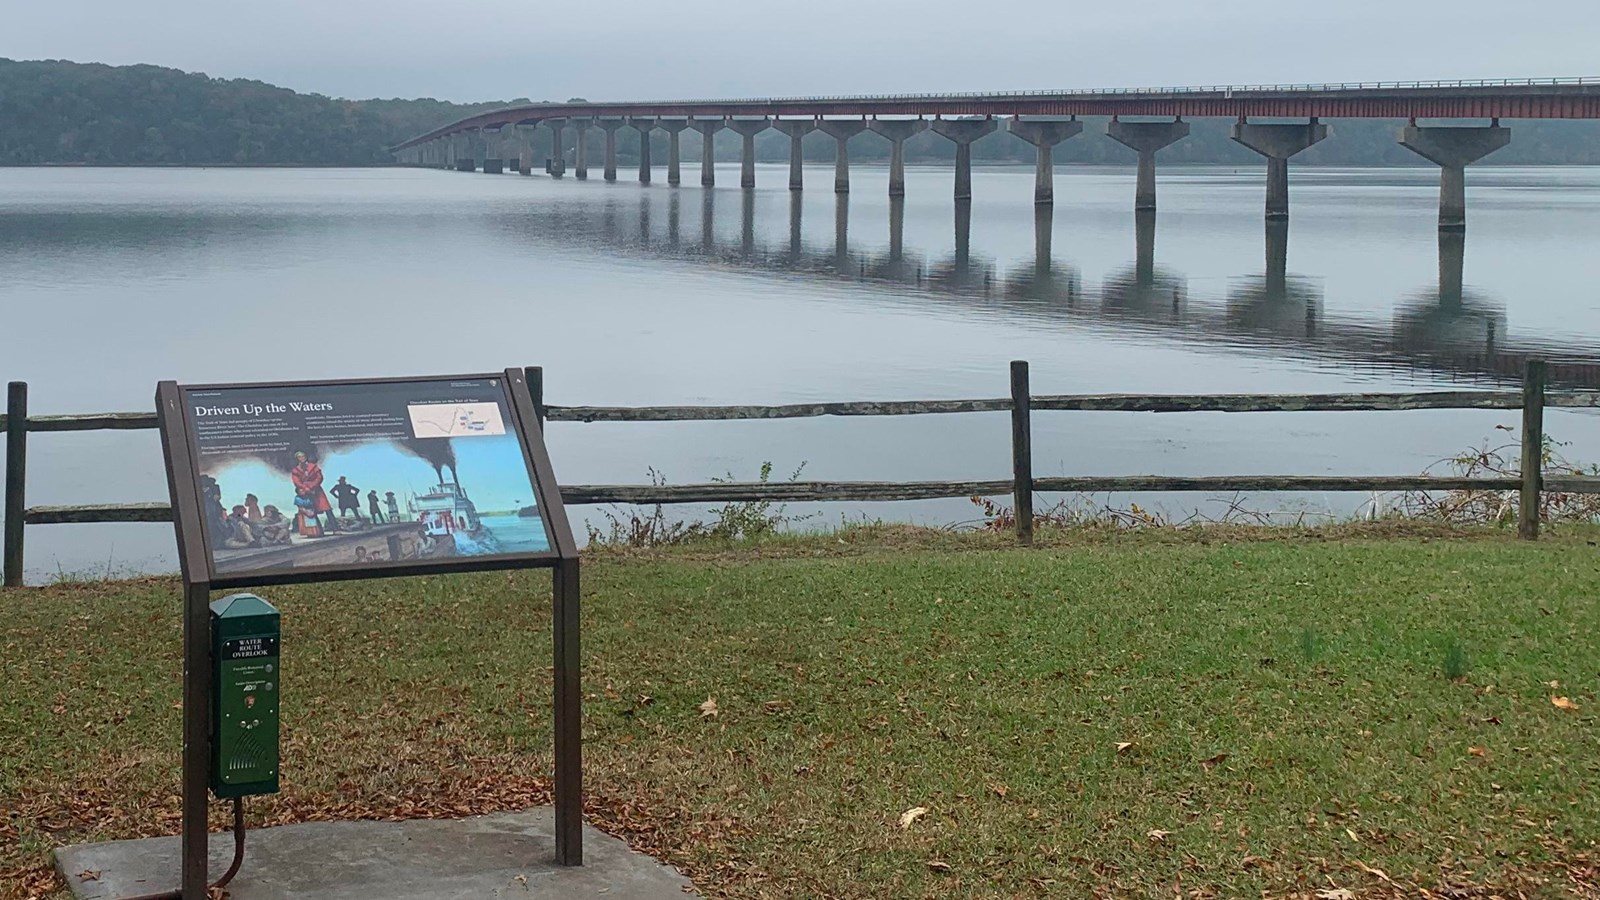 Water Route Overlook wayside gives information on Trail of Tears. View is of the Tennessee River 